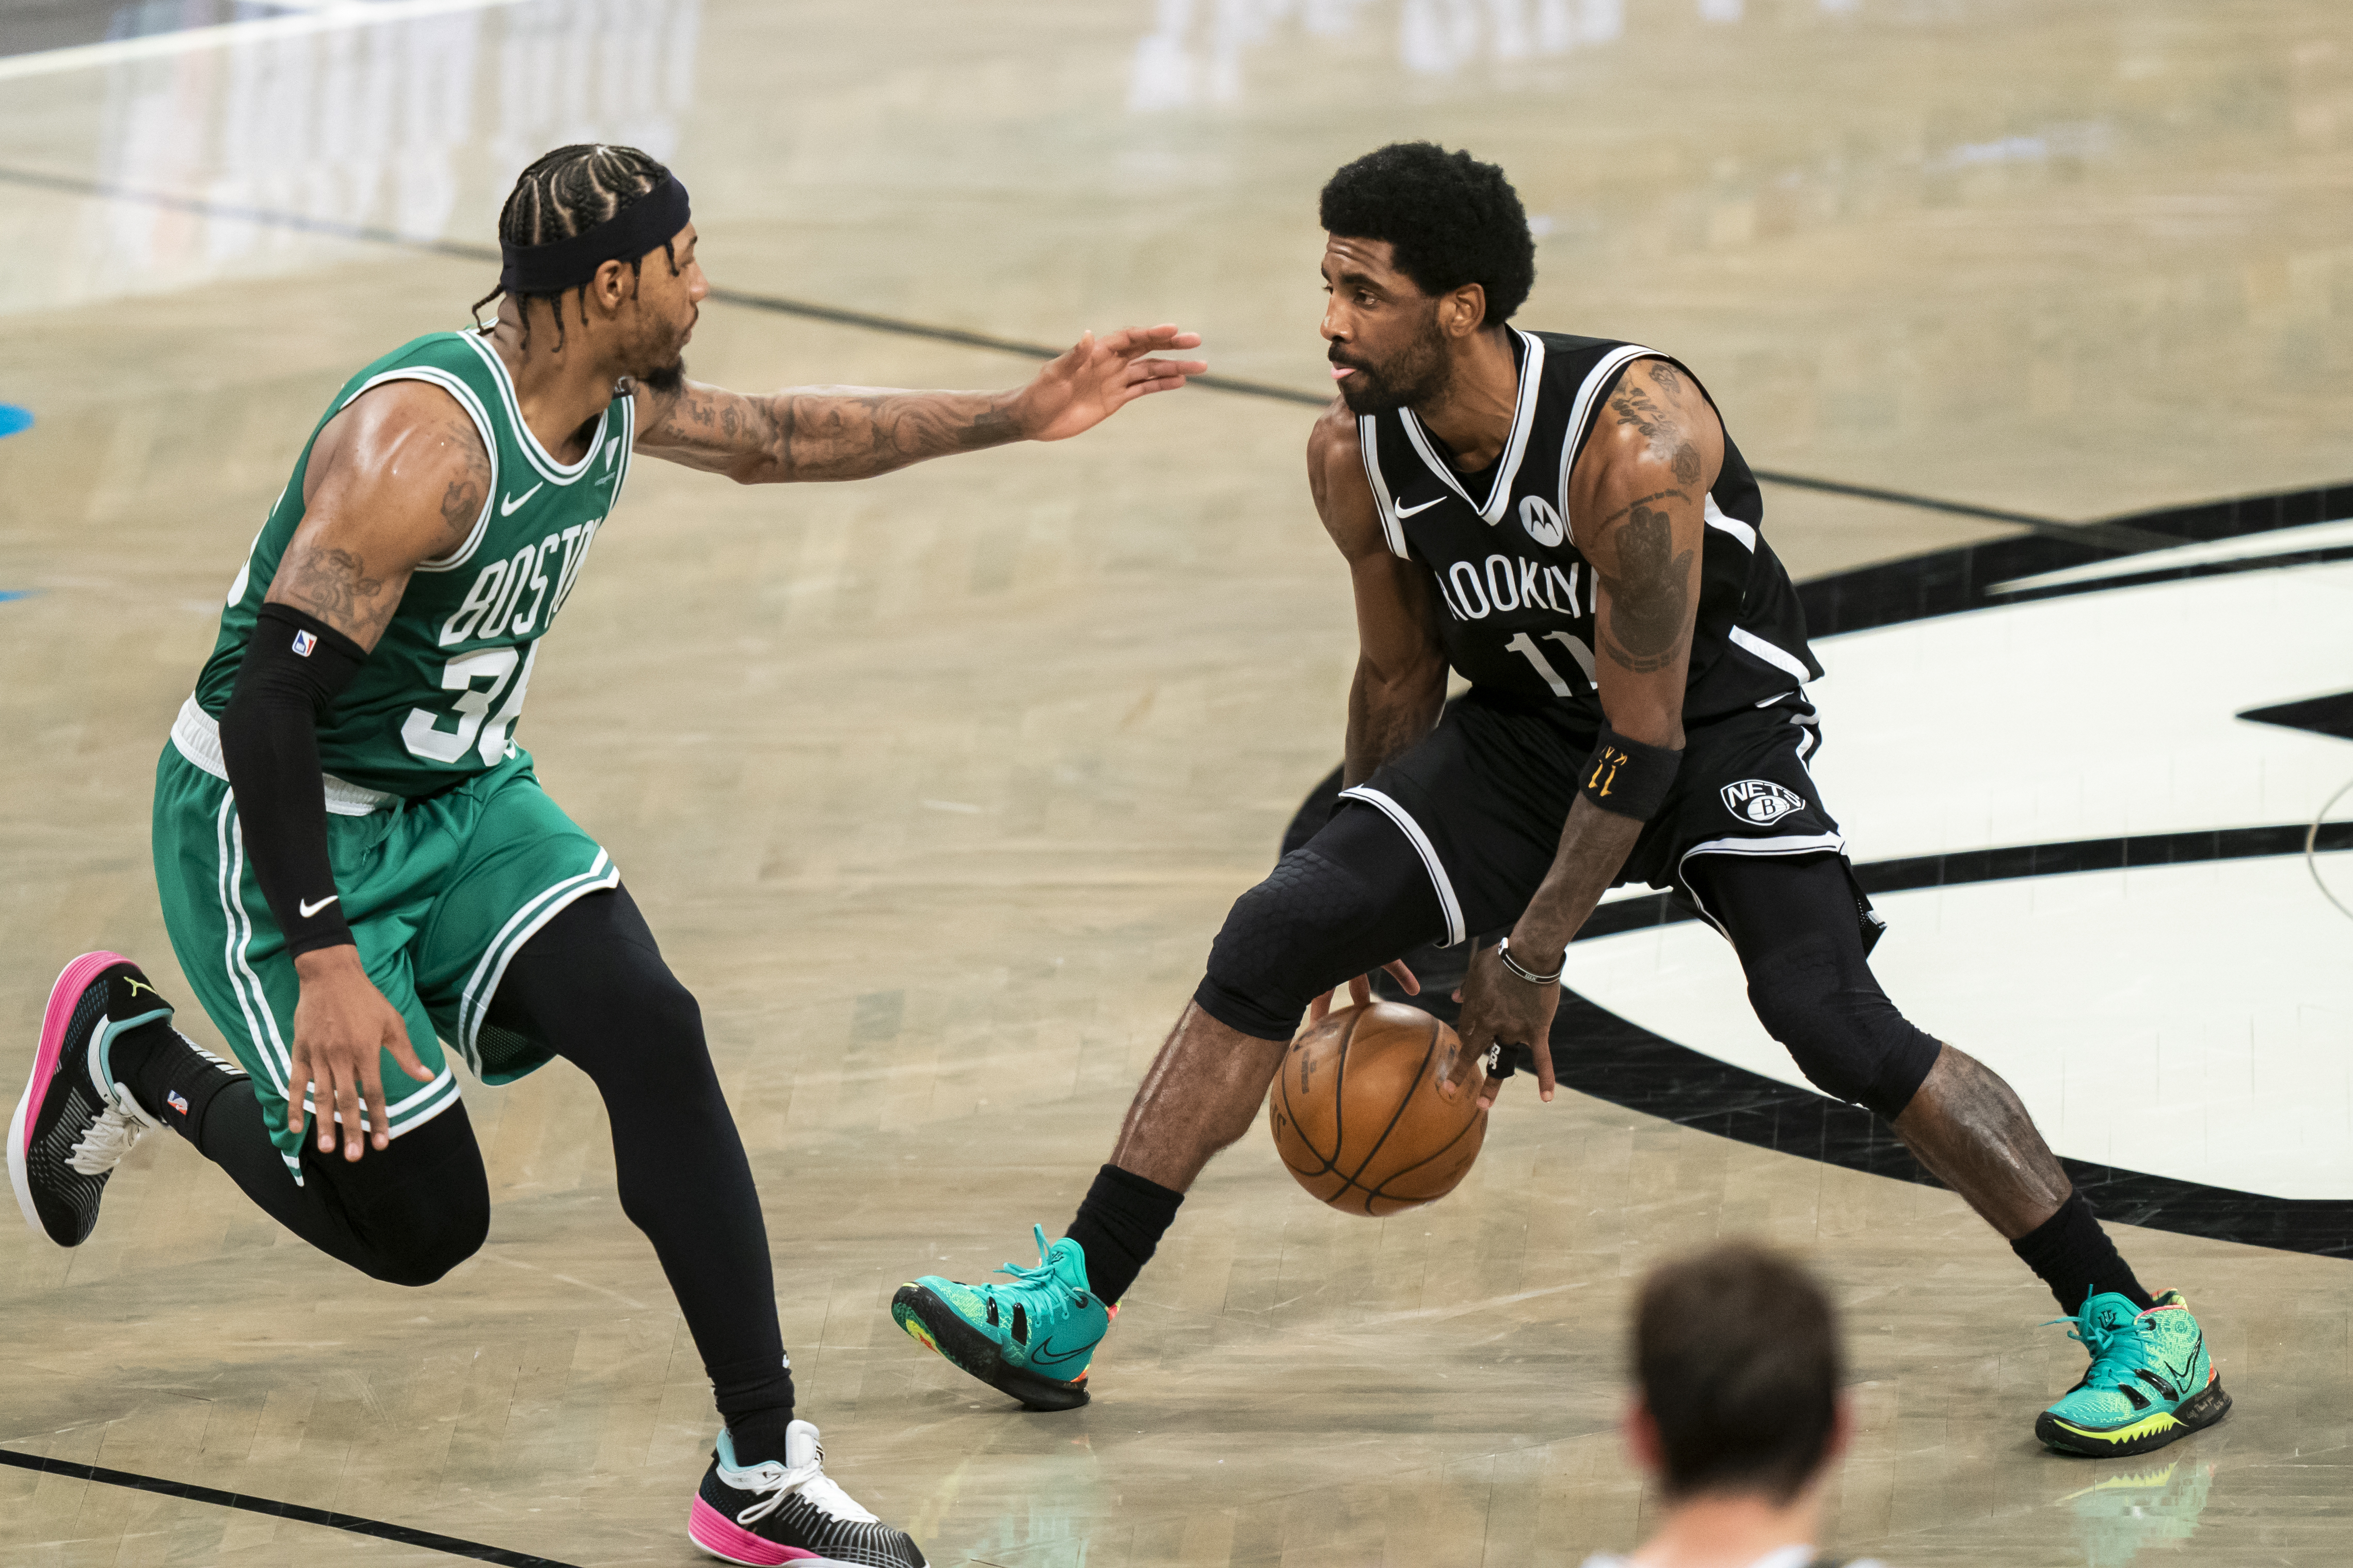 Kyrie Irving hasn't given Nets a lift since his return